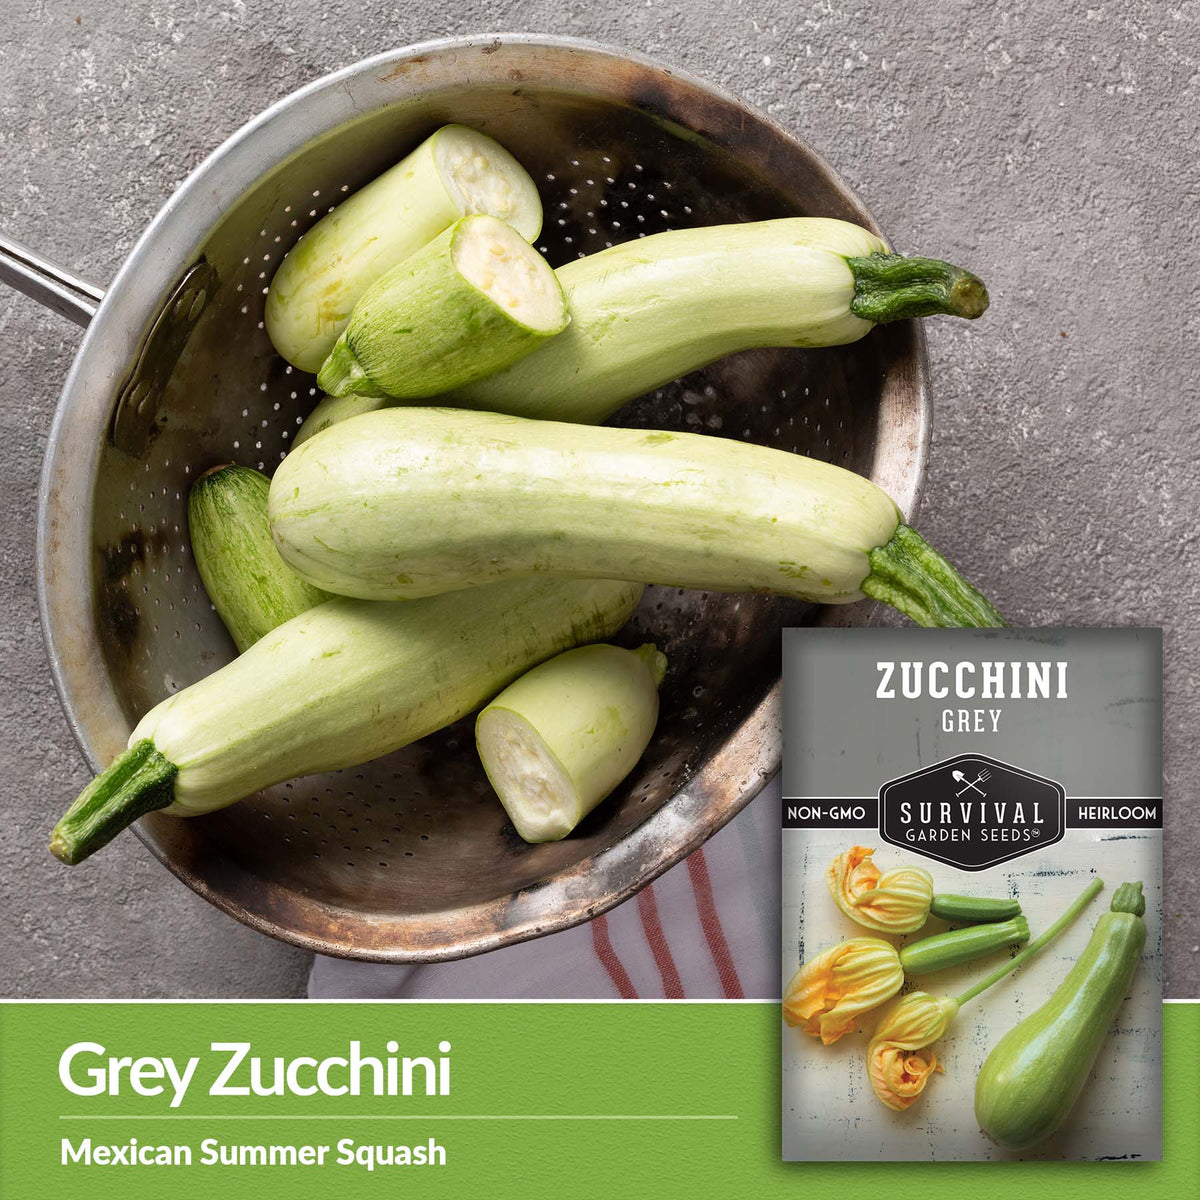 Grey Zucchini also known as Mexican Summer Squash